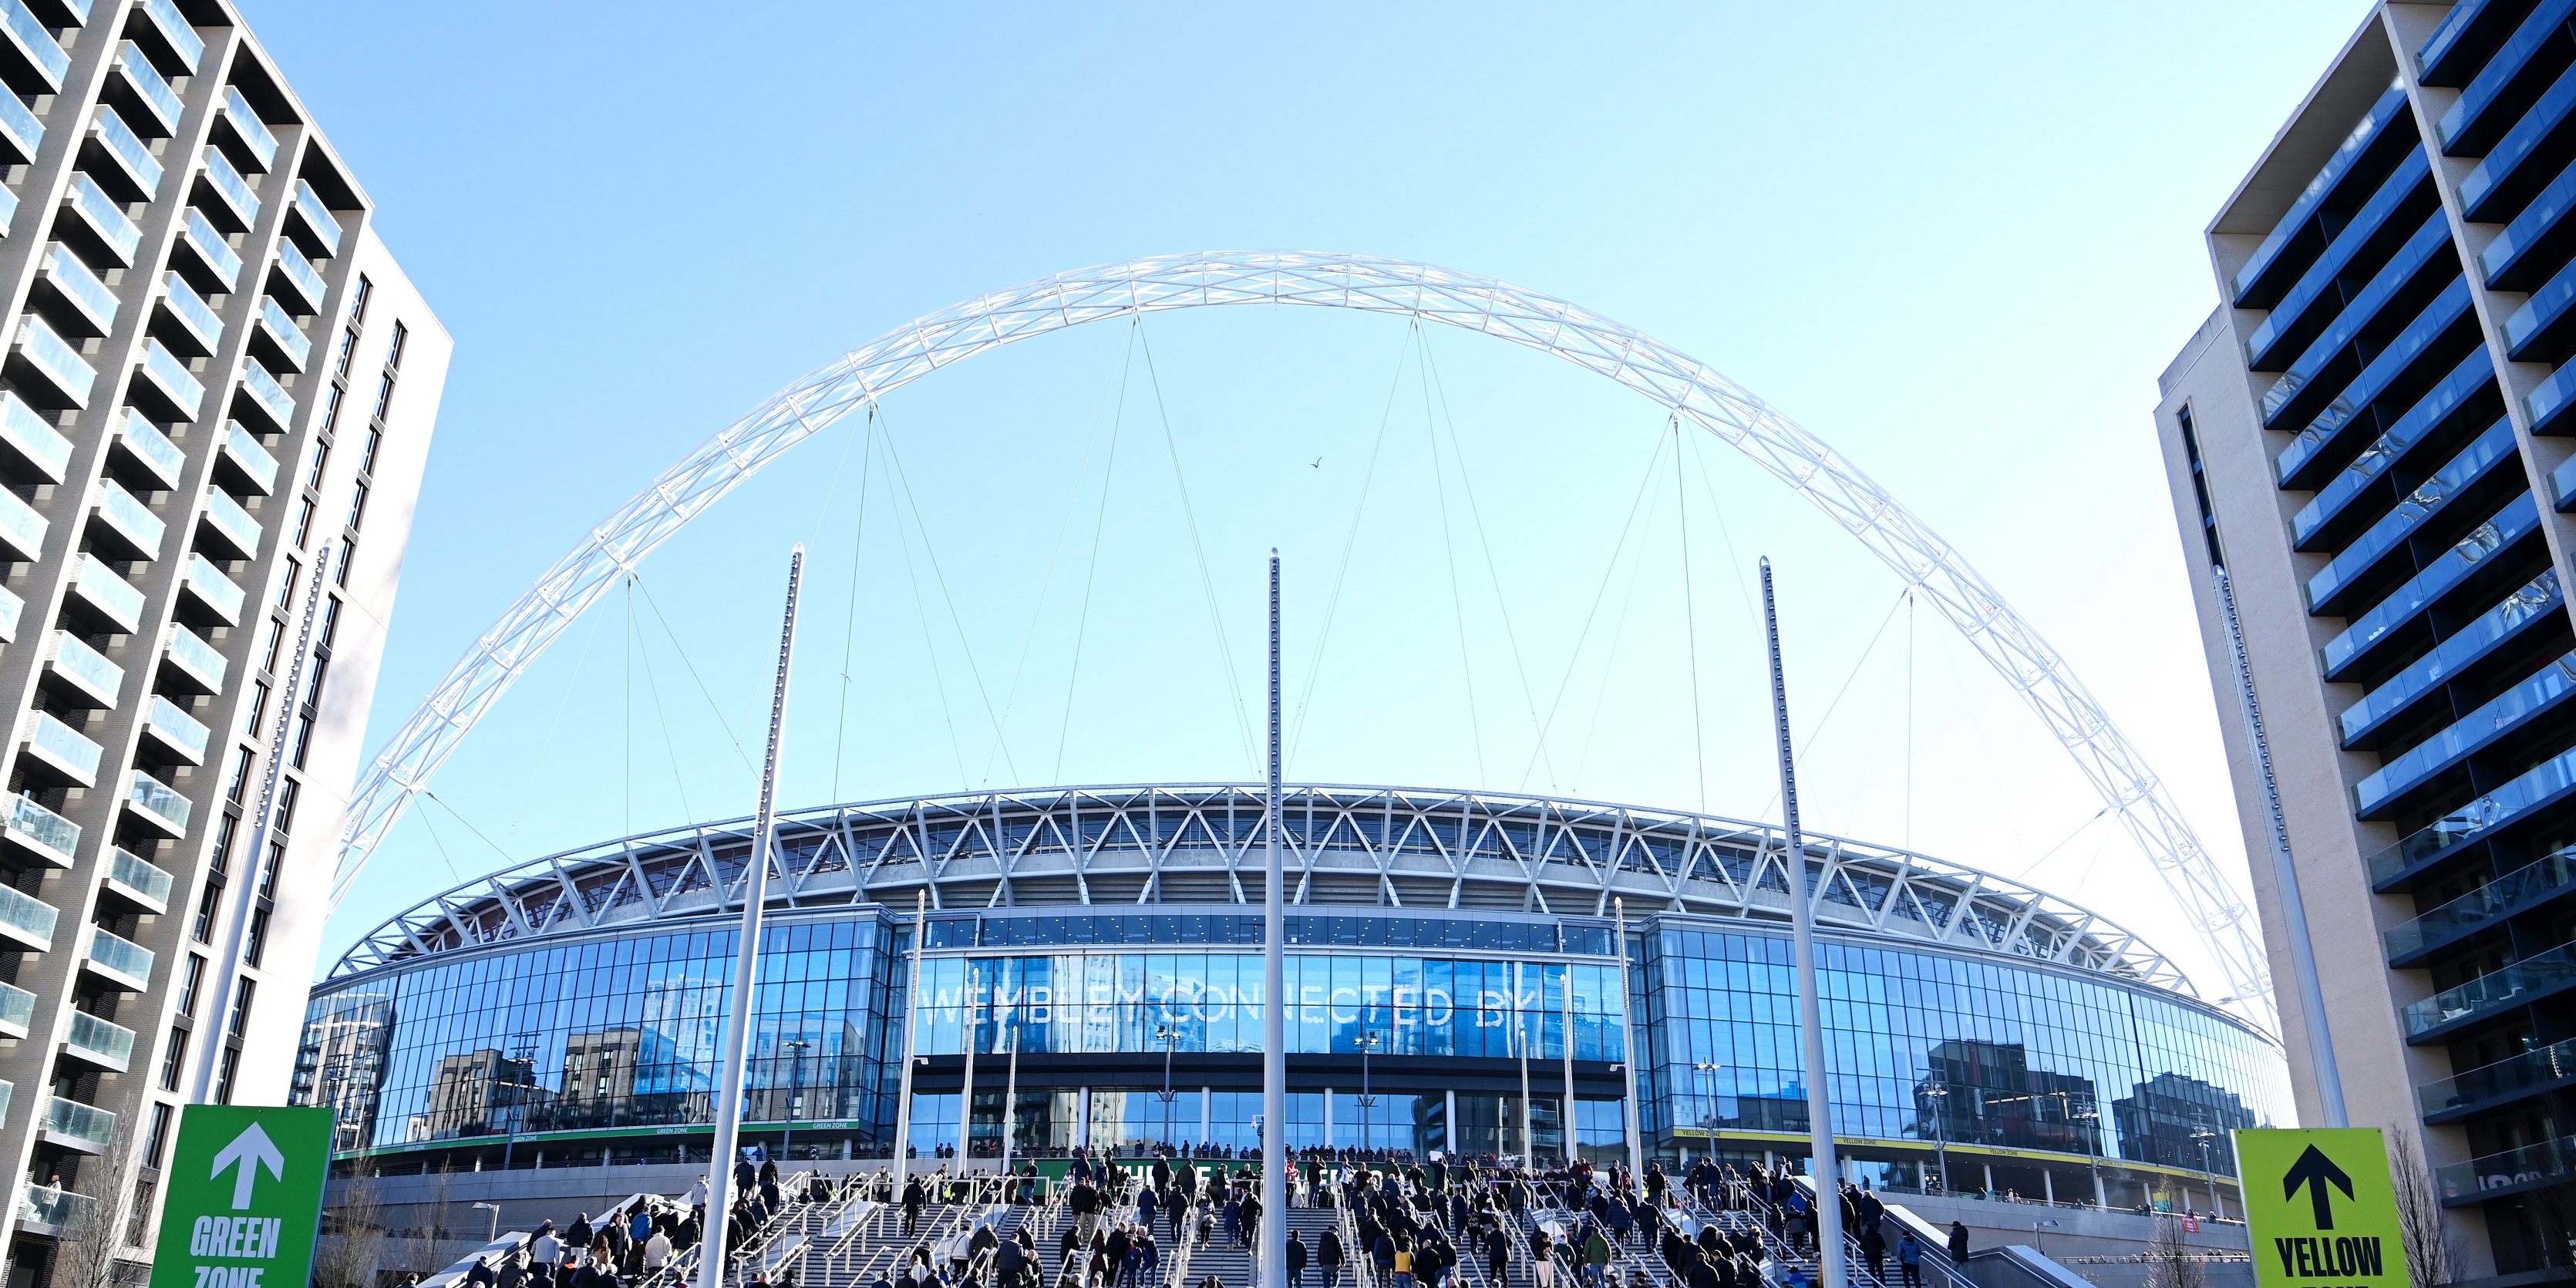 Football Association to provide 100 free buses for fans travelling to FA Cup semi-final between Liverpool and Manchester City at Wembley